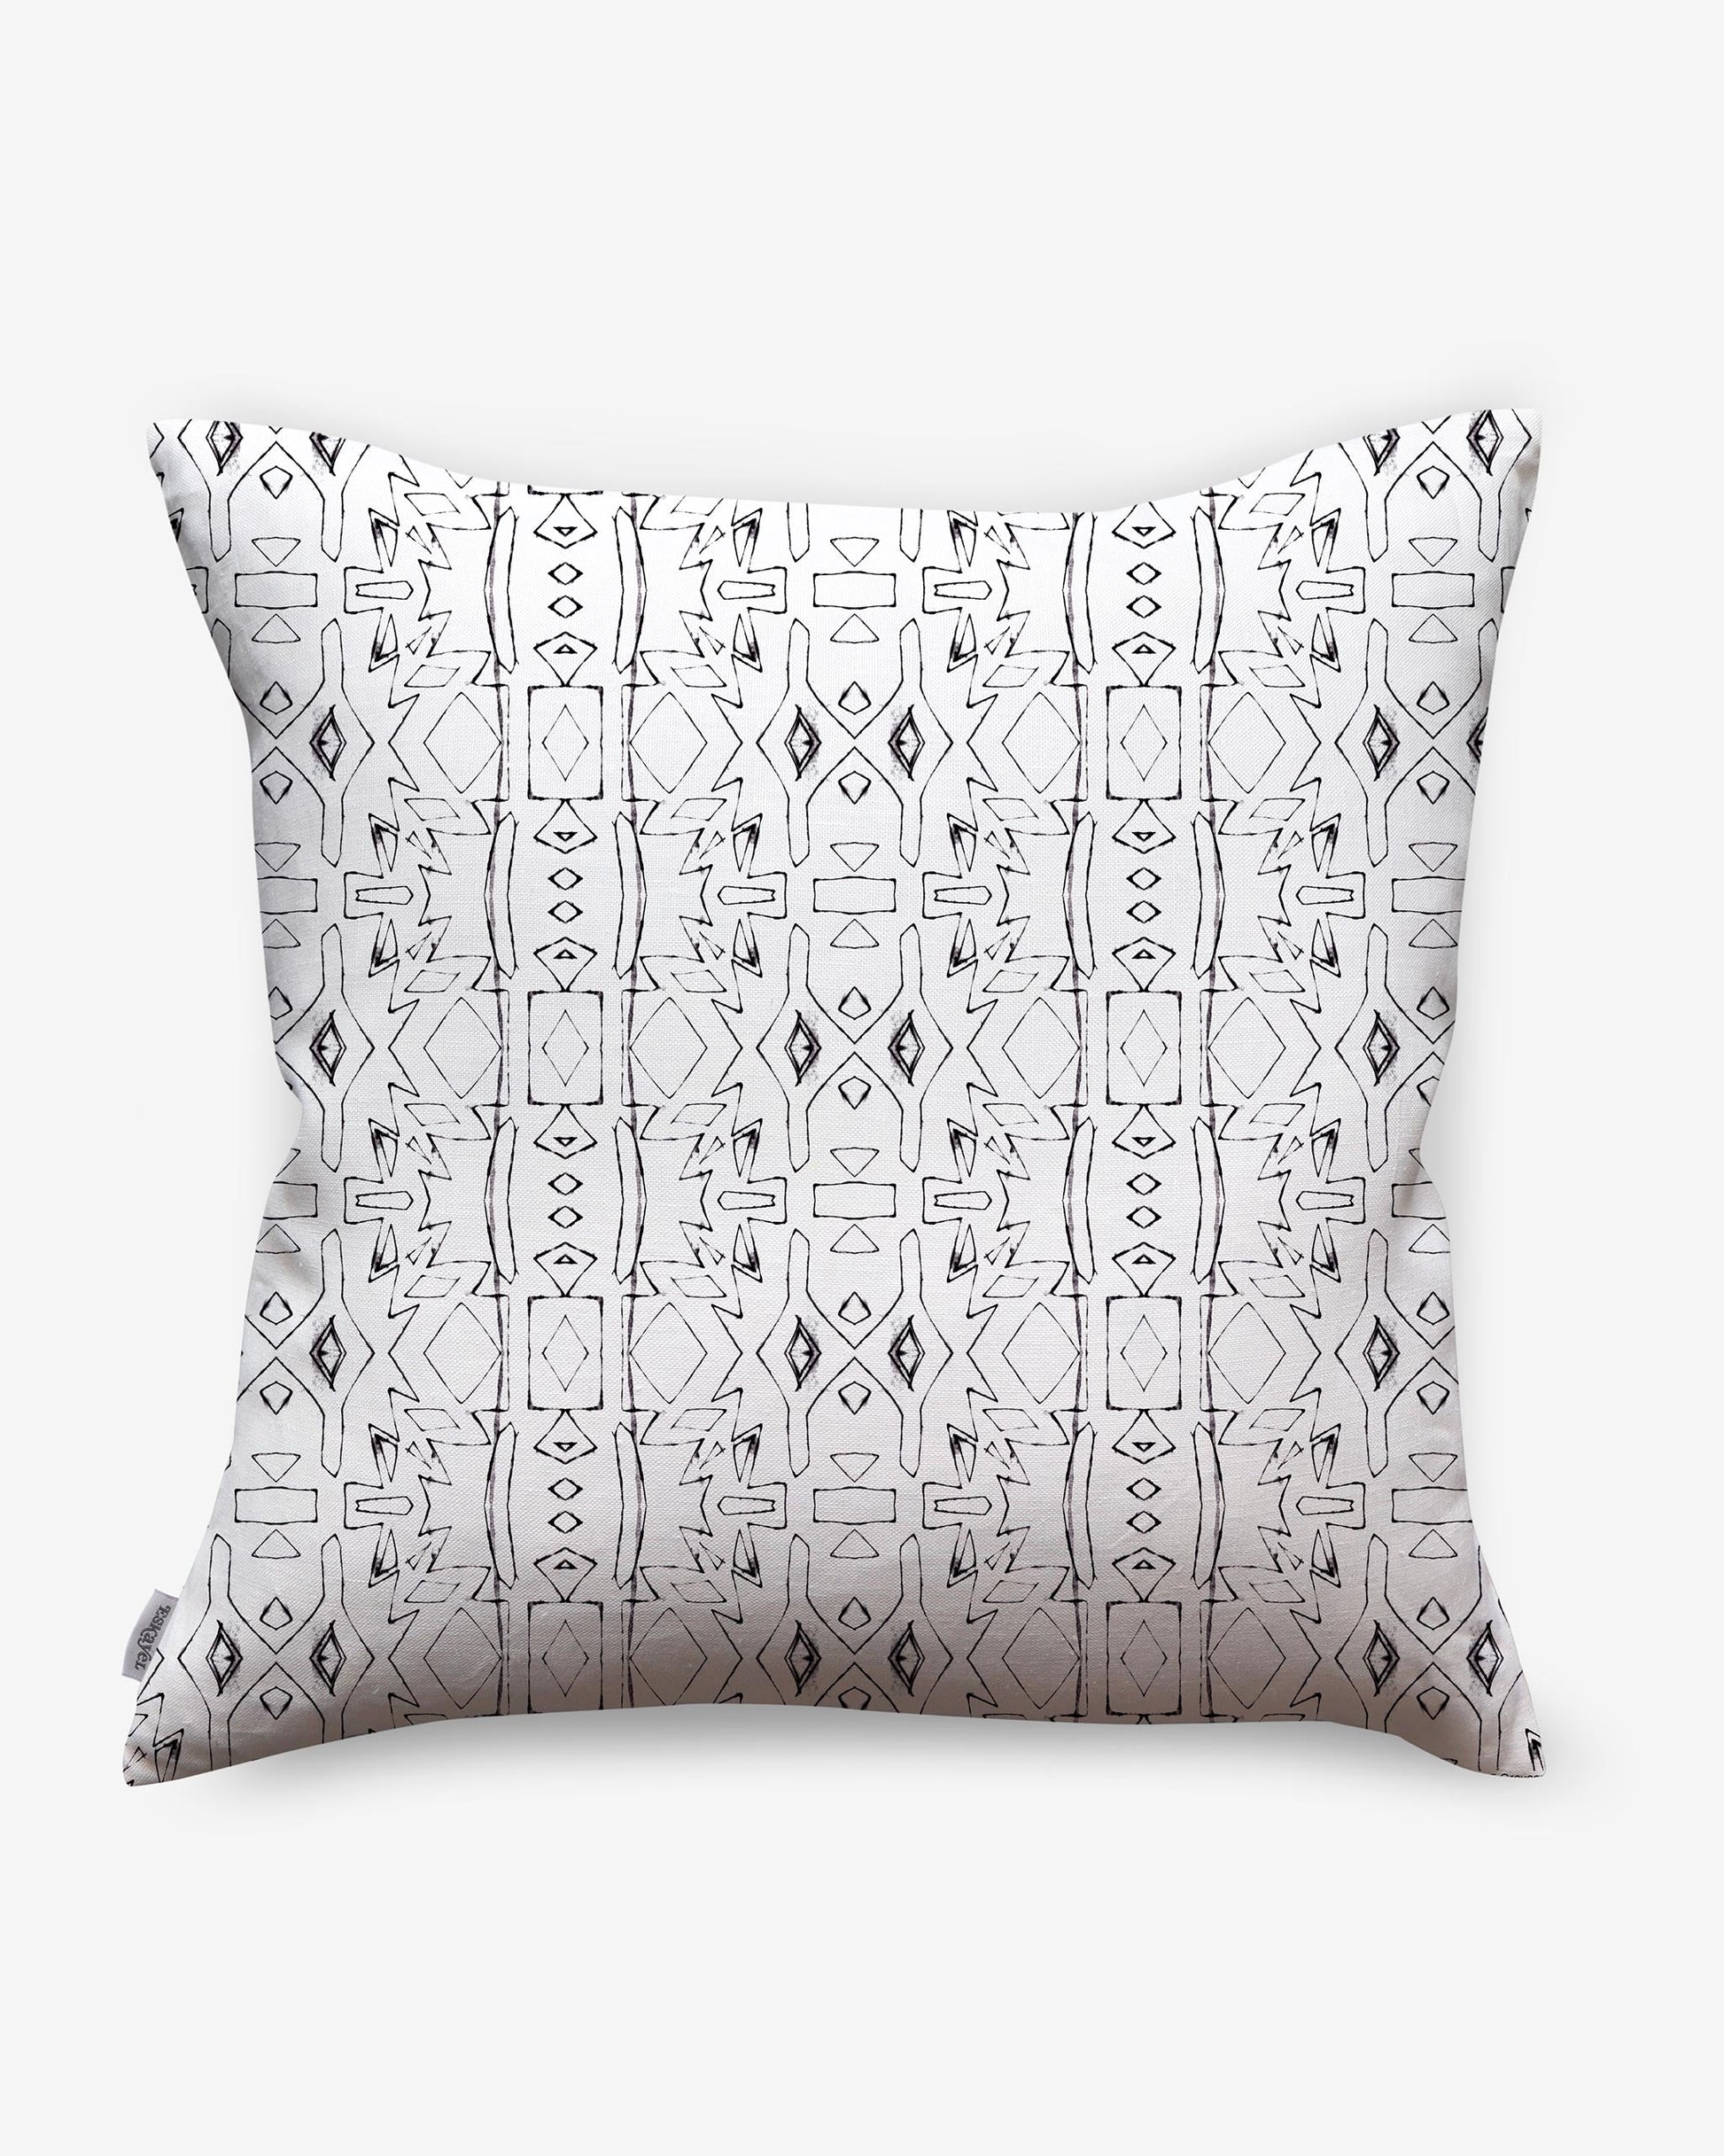 A Akimbo 5 Pillow Greyscale with a black and white geometric pattern